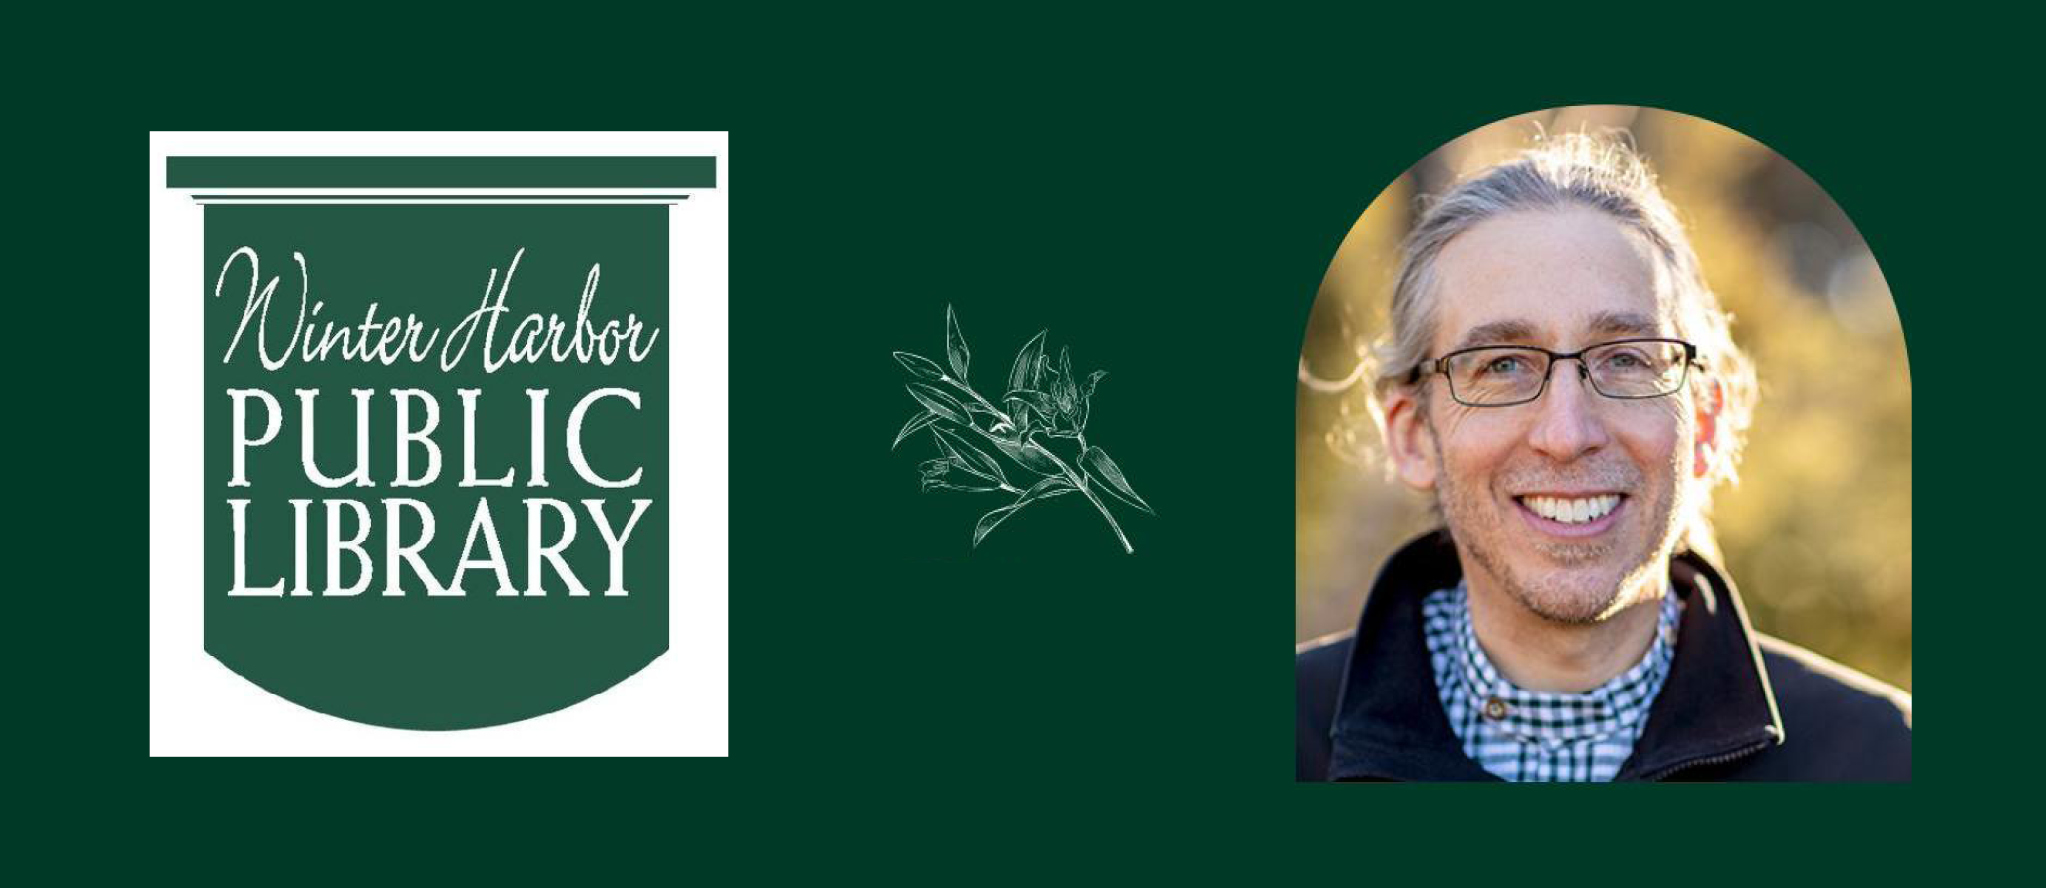 Left-hand side: Winter Harbor Public Library logo in green and white. Middle: white outline illustration of a flowering plant. Right-hand side: headshot of Nick Fisichelli.